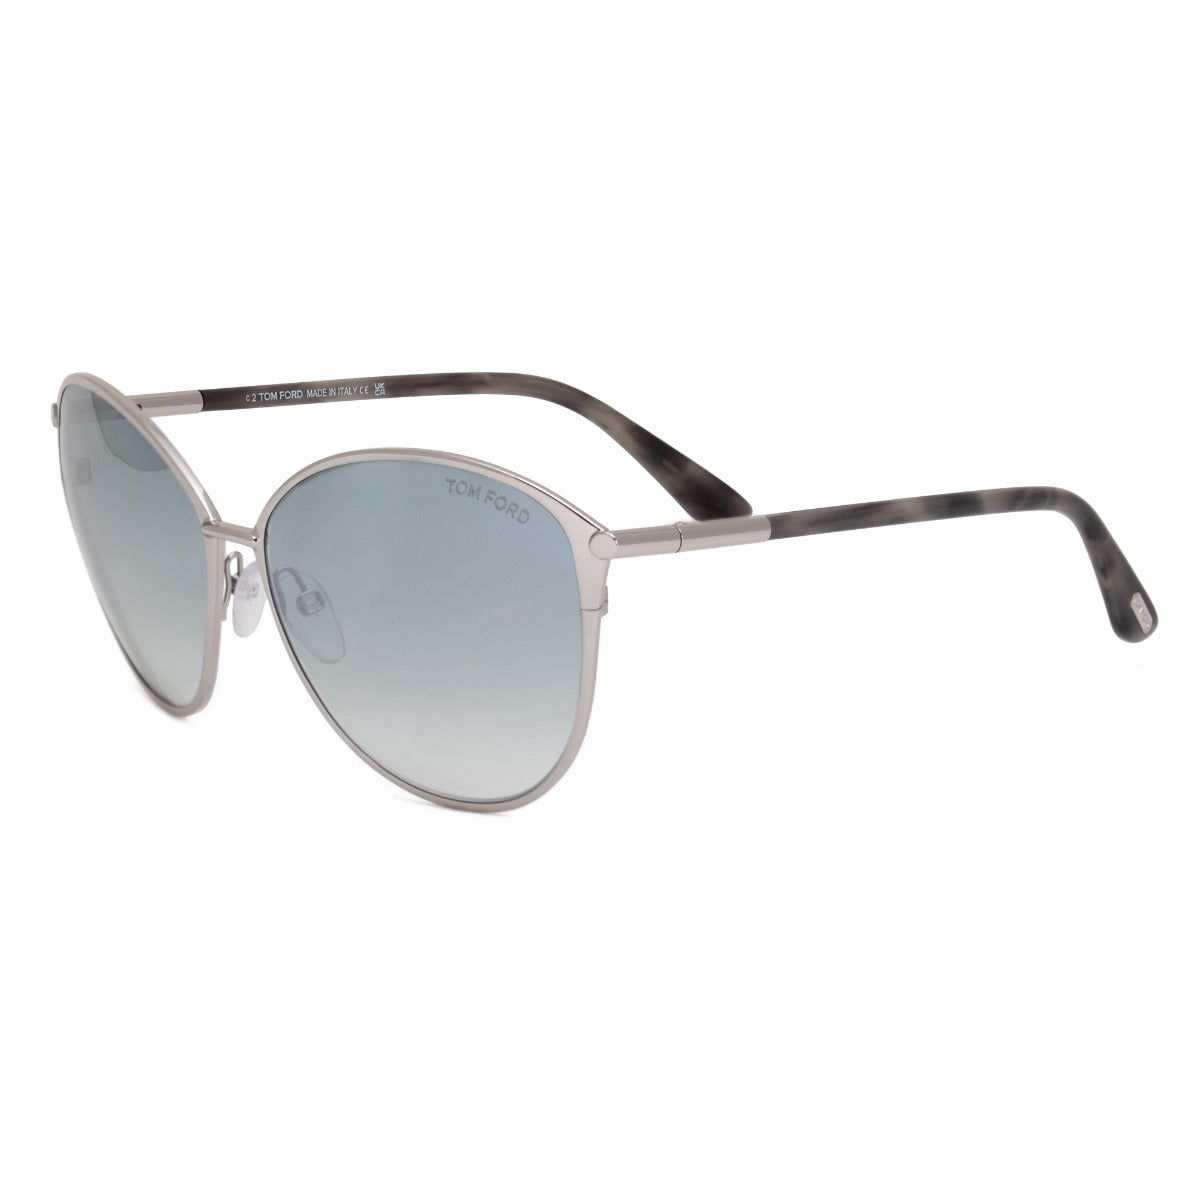 Tom Ford Oval Sunglasses FT0320 16W 59